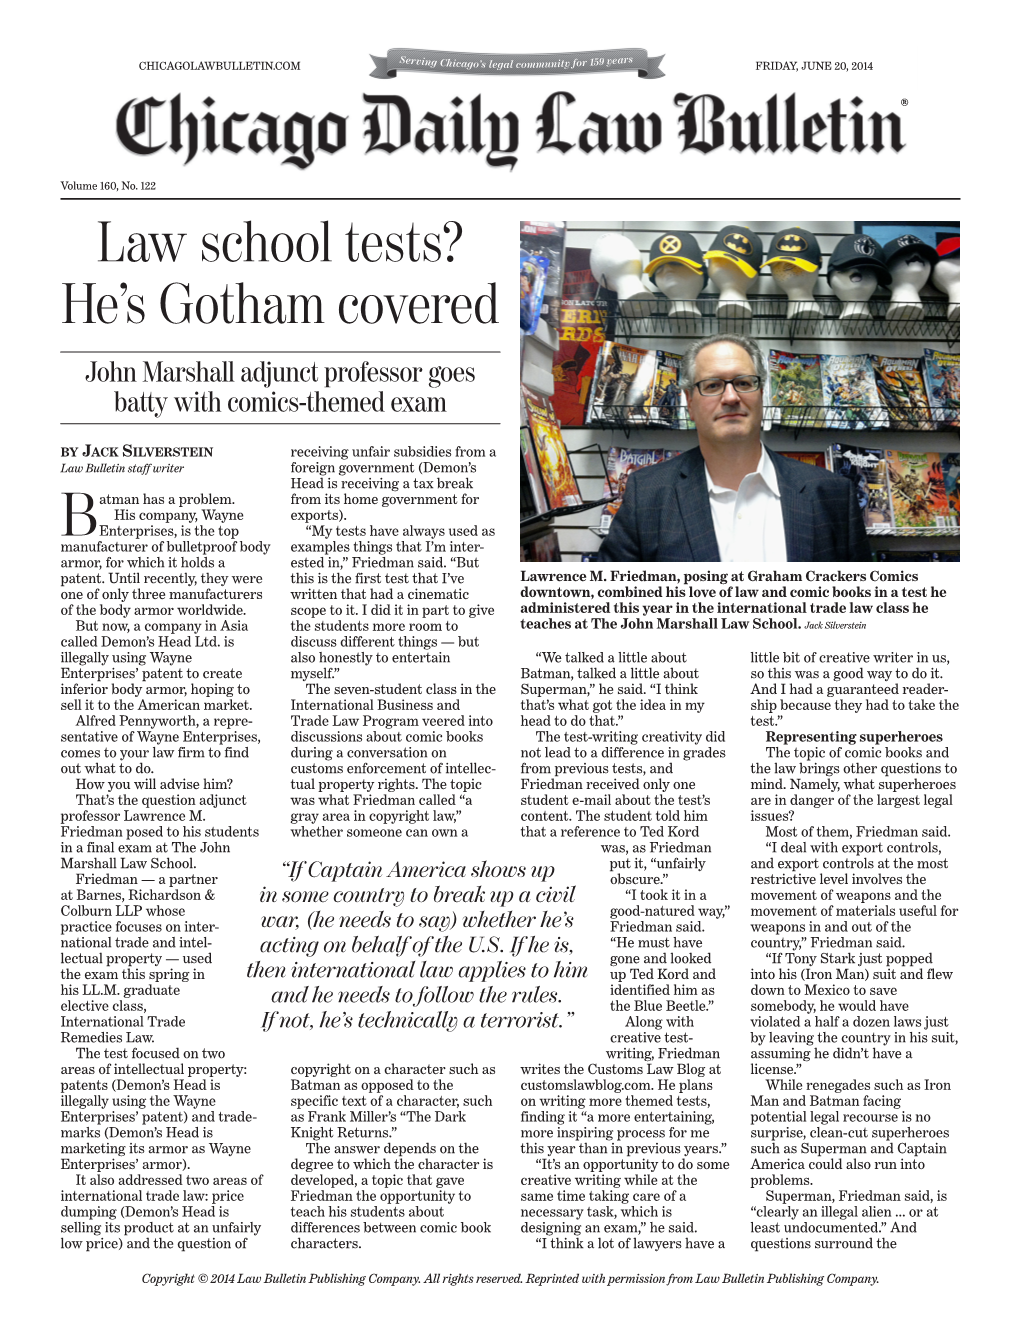 Law School Tests? He's Gotham Covered